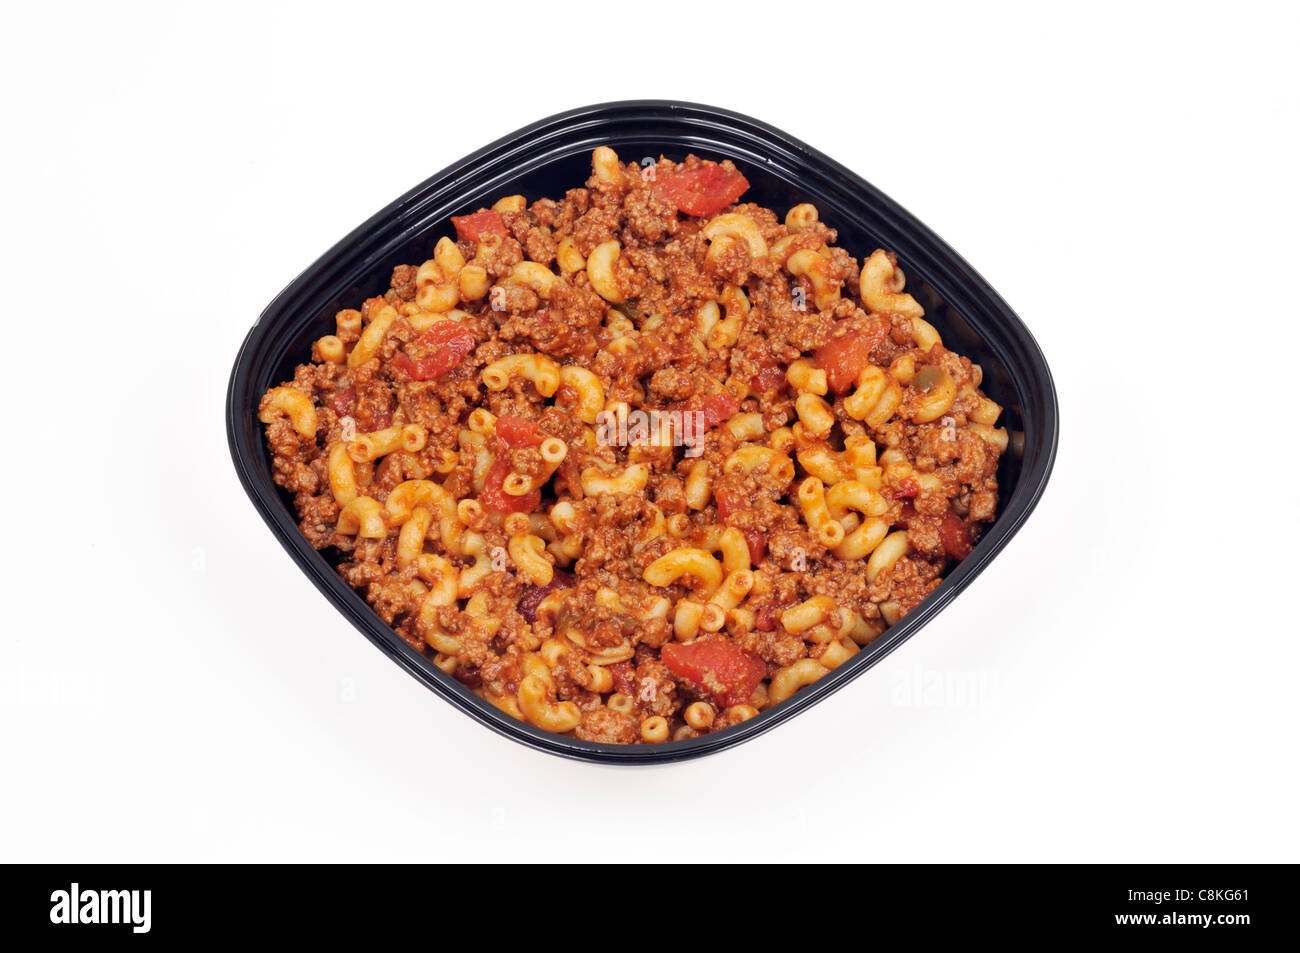 Takeaway tin of cooked macaroni and beef with tomatoes on white background, cutout. Stock Photo